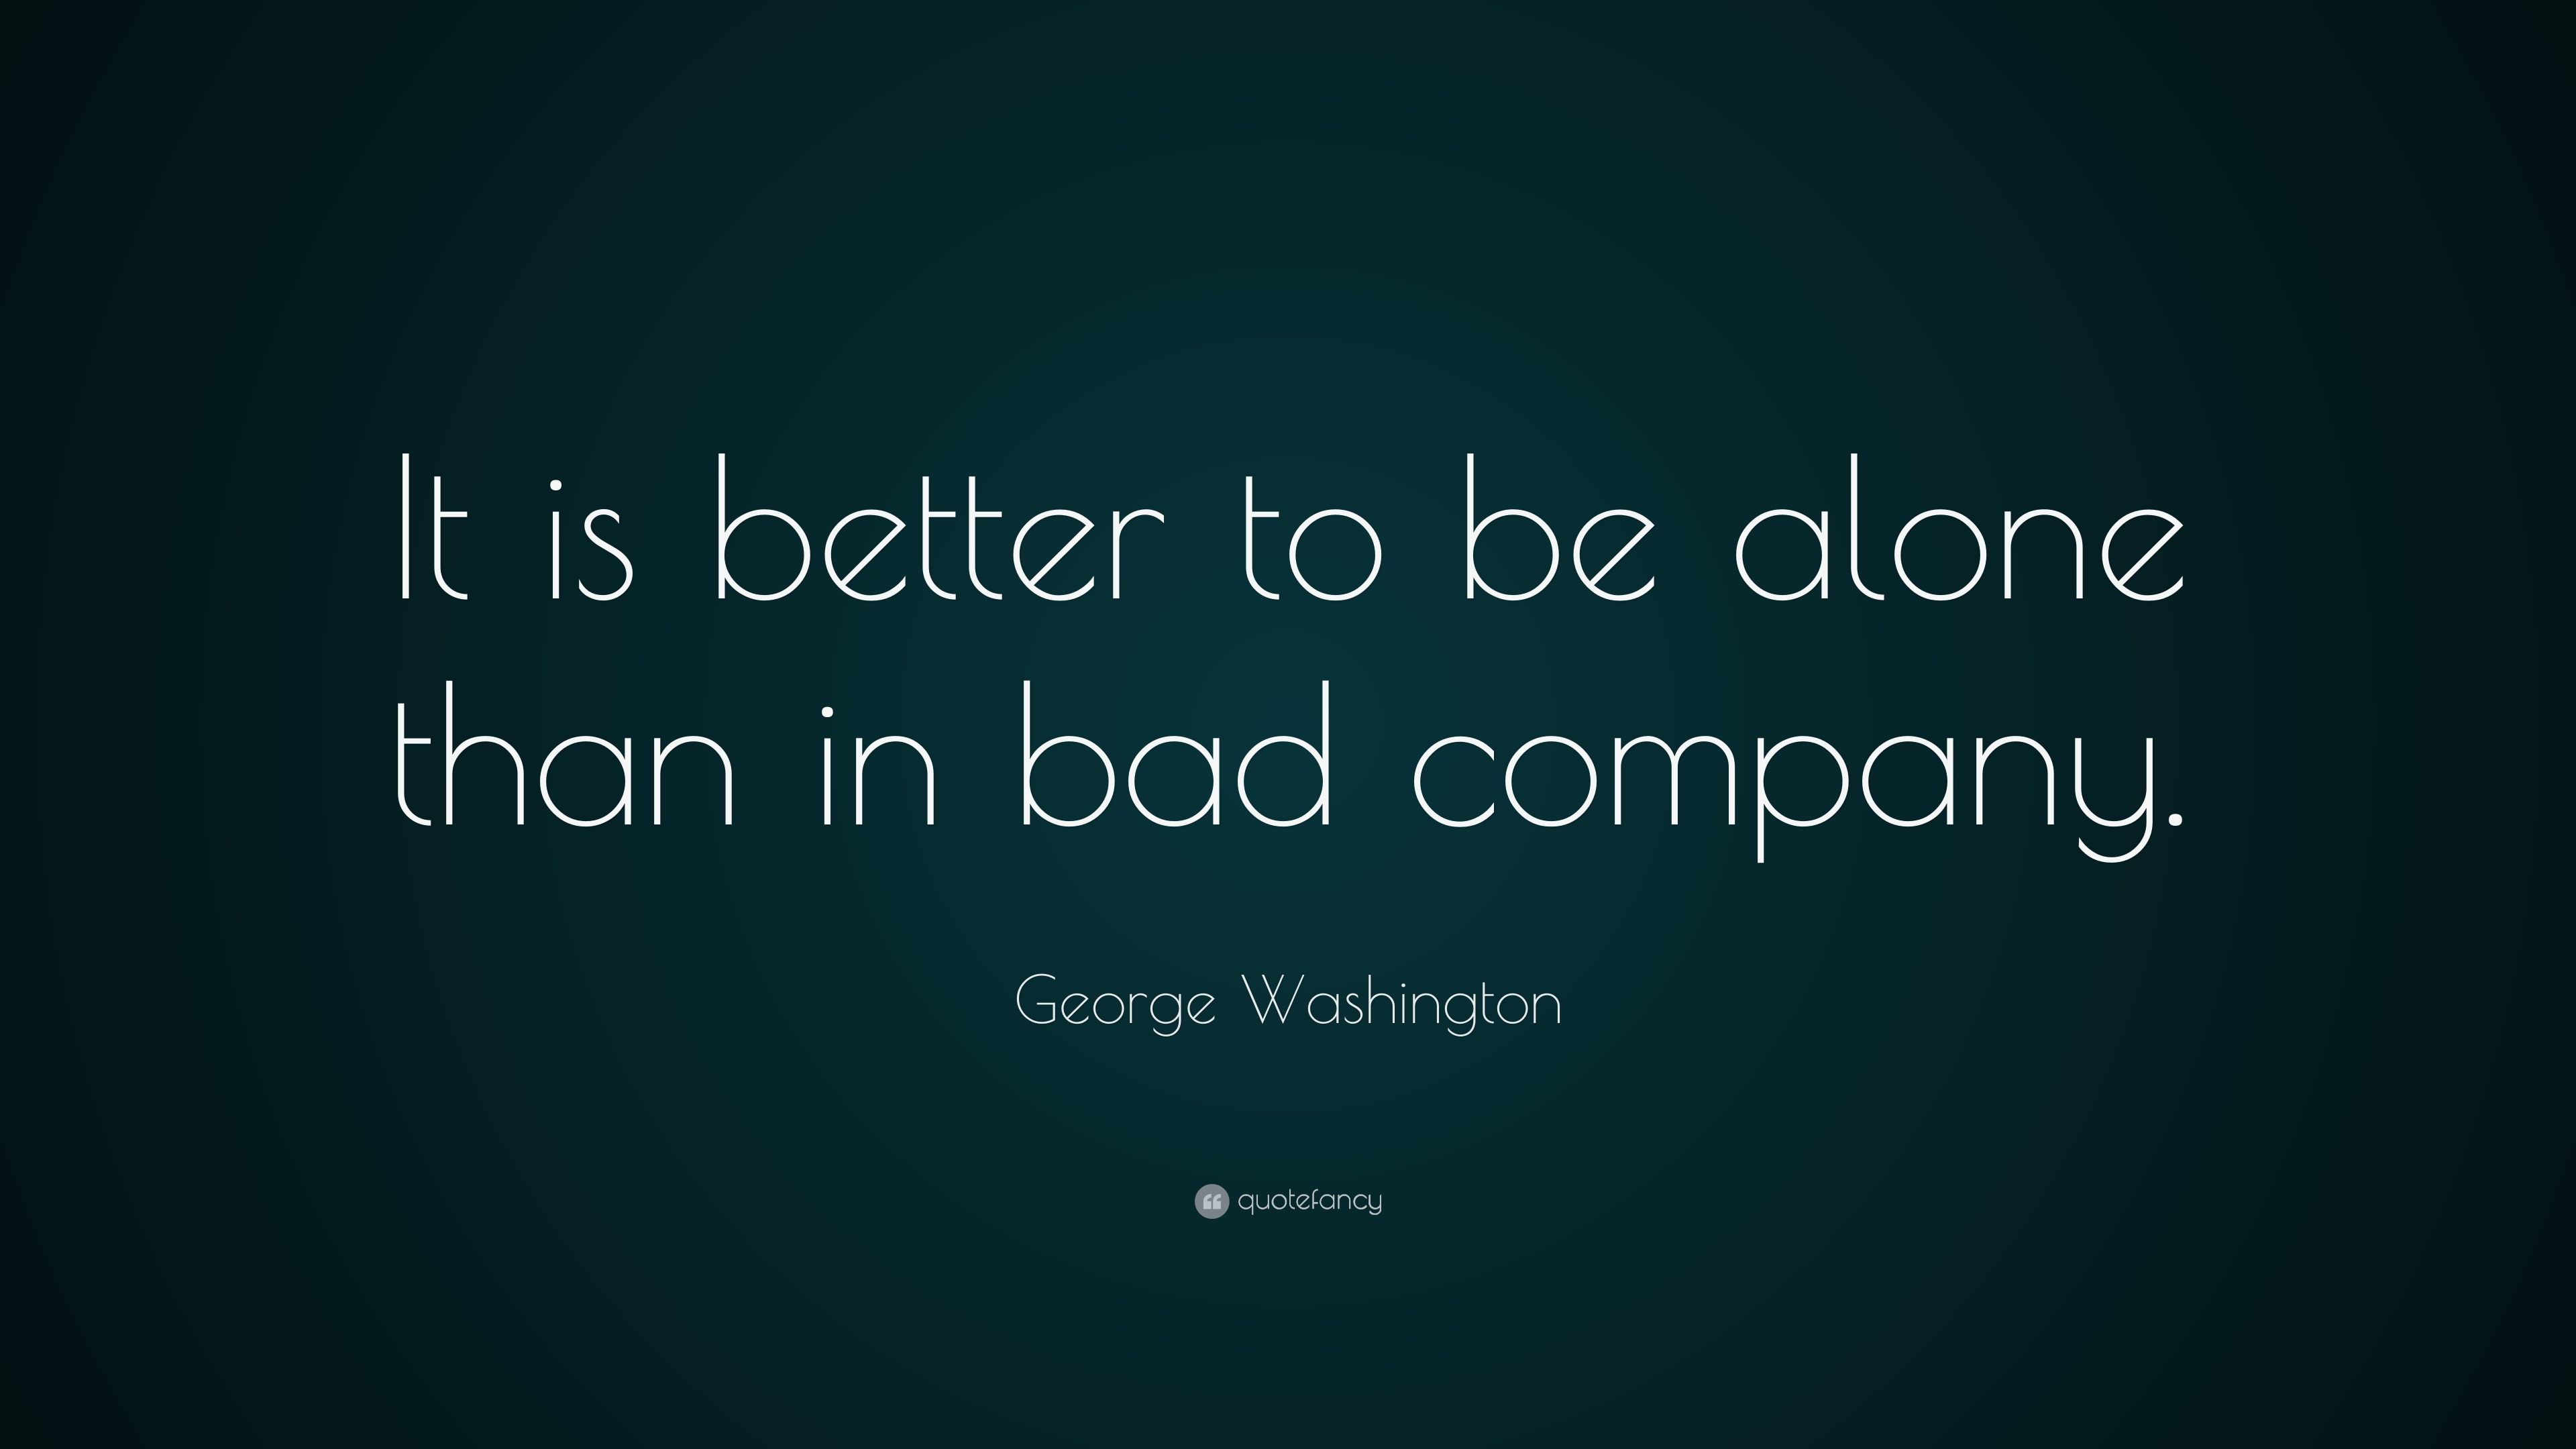 George Washington Quote: “It is better to be alone than in bad